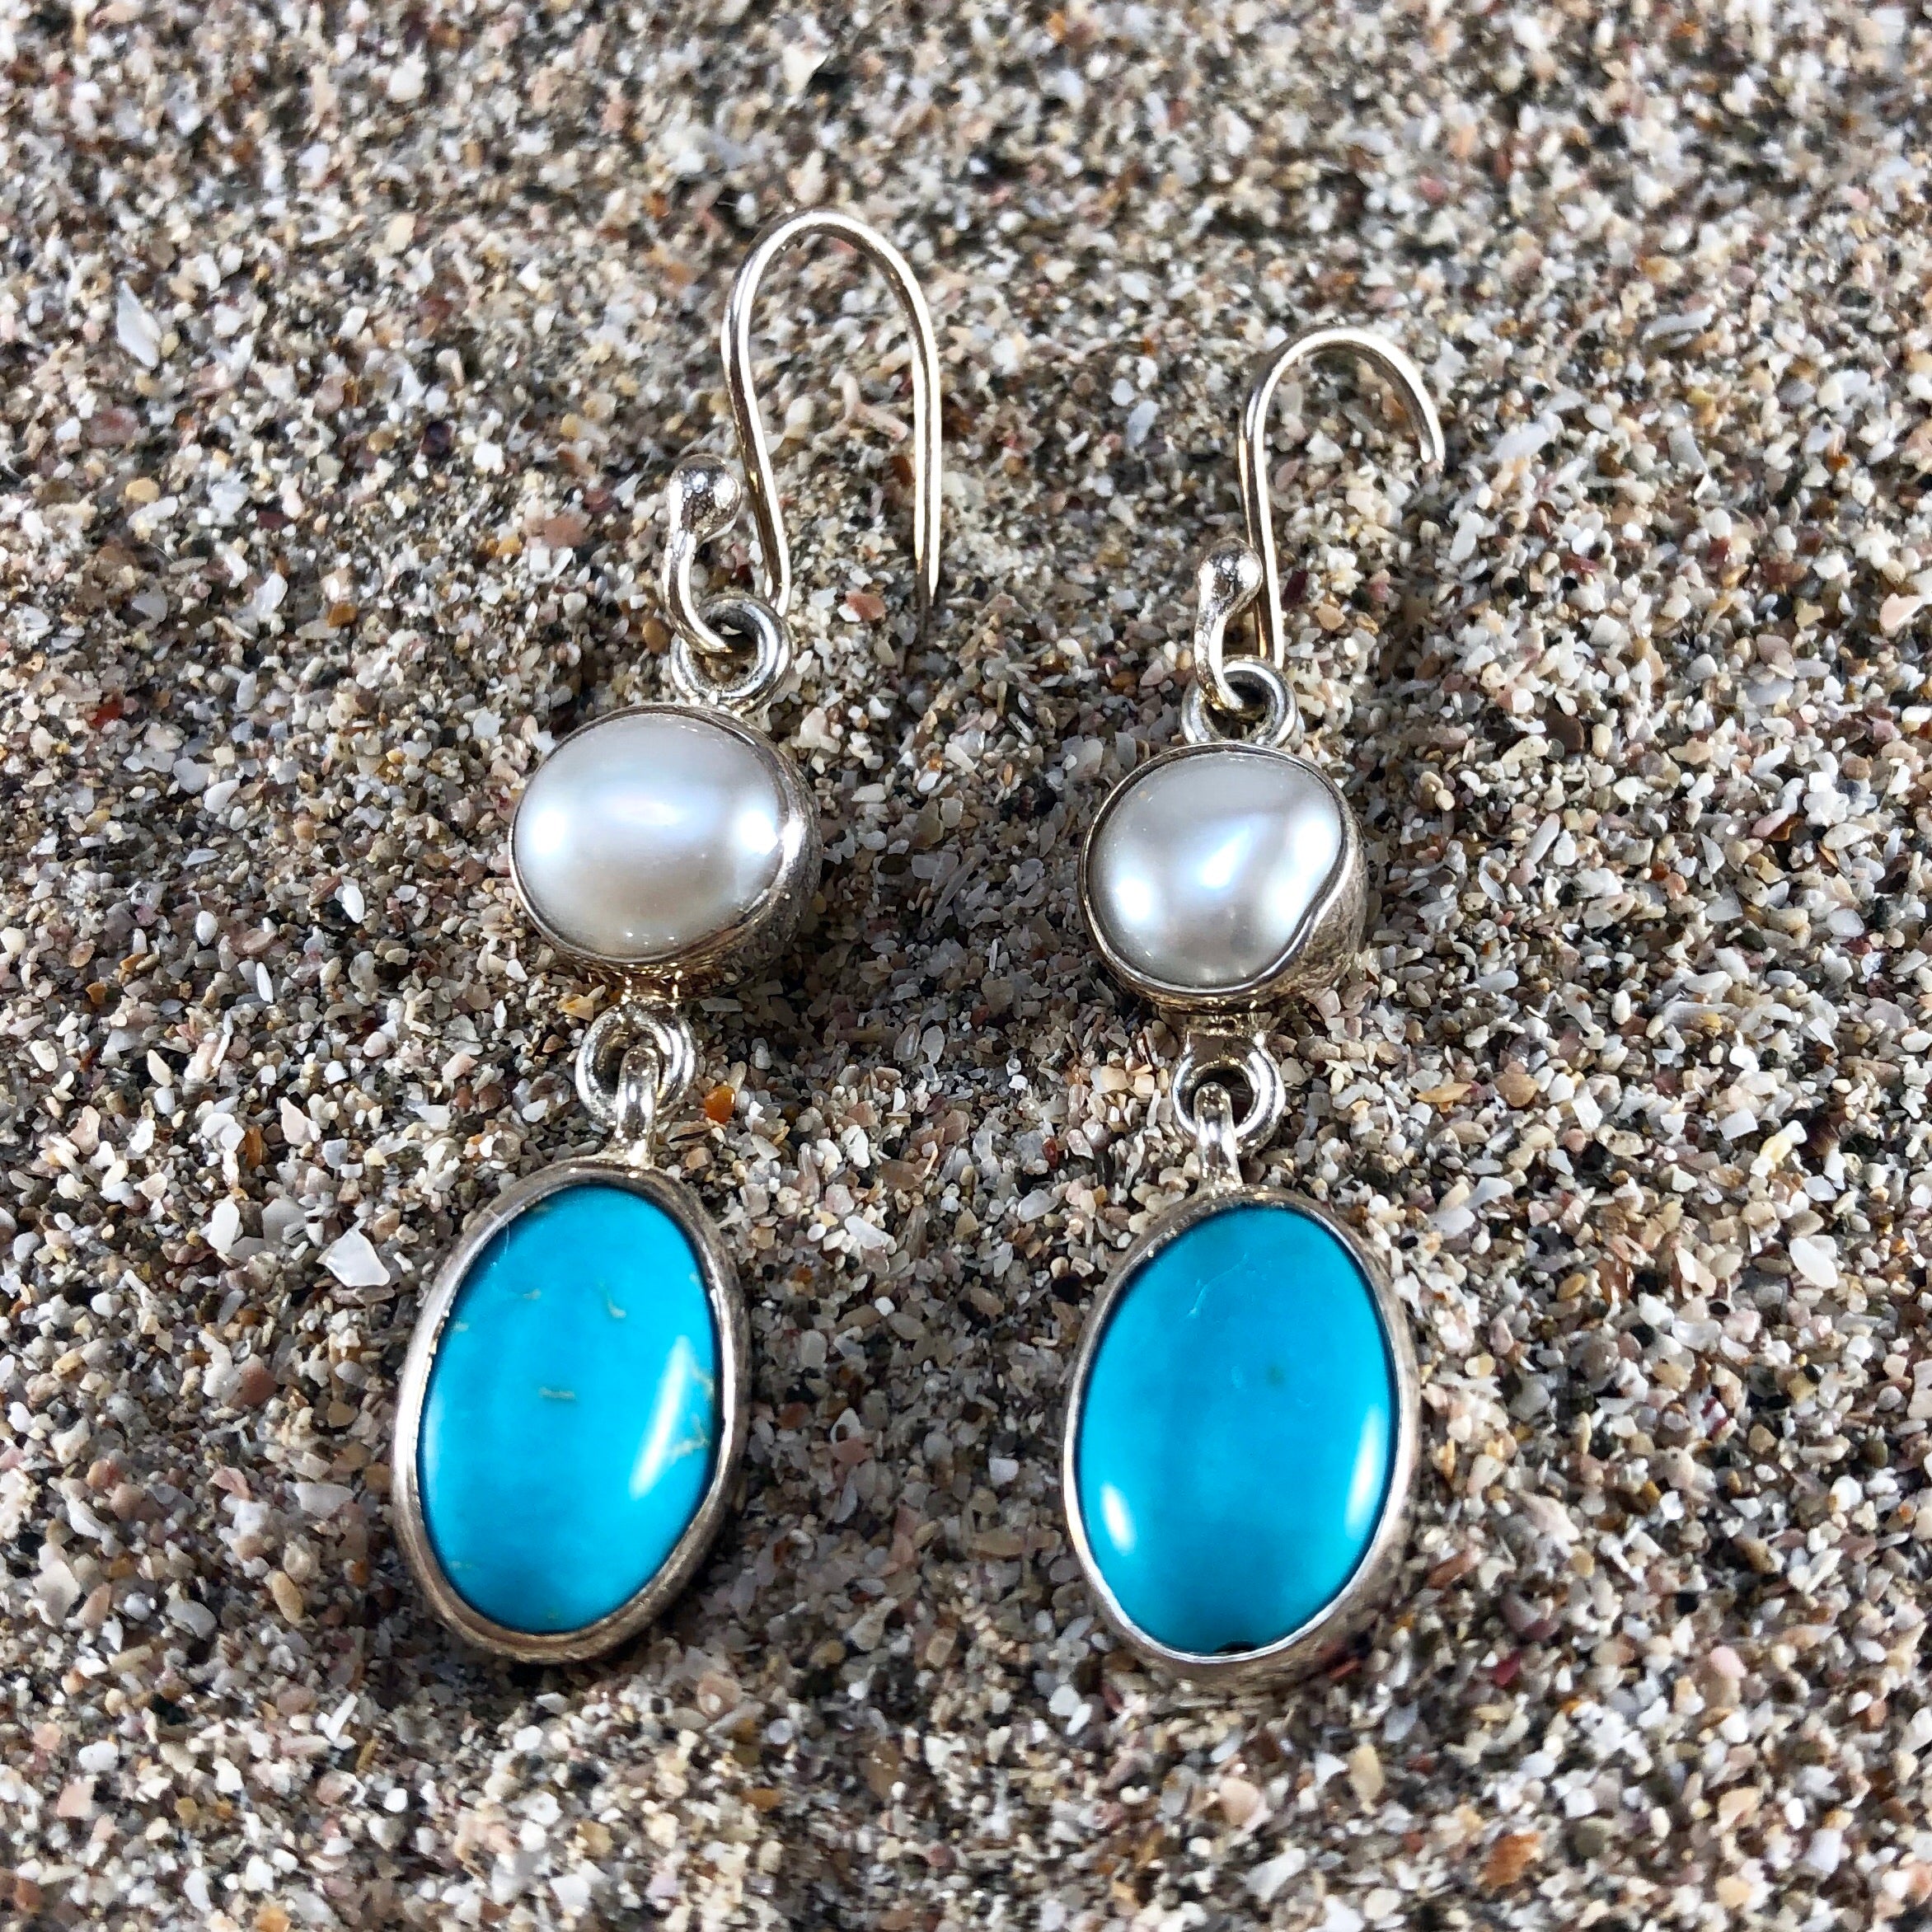 Double Pearl Earrings with Turquoise-Jenstones Jewelry